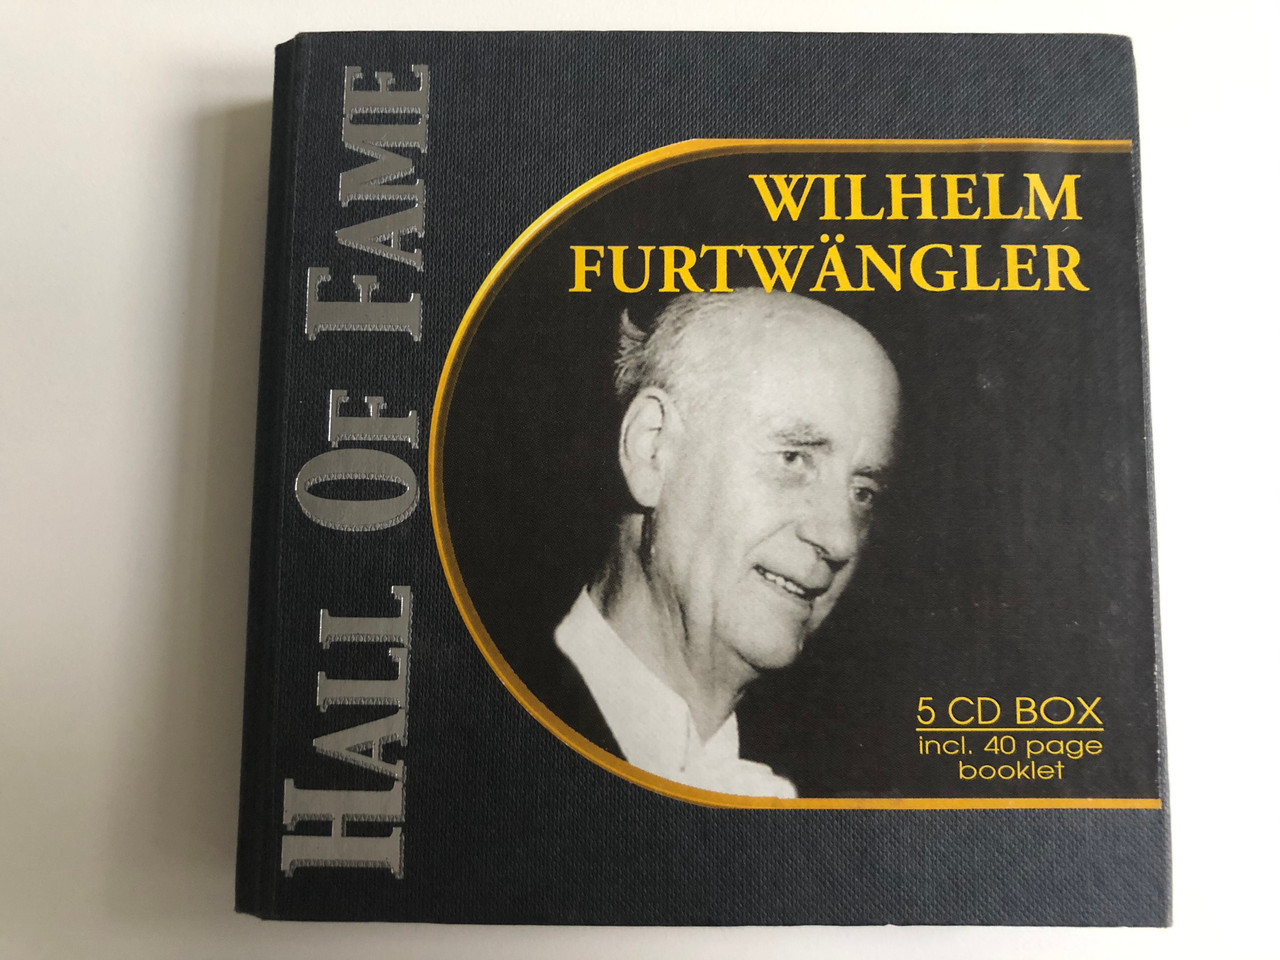 https://cdn10.bigcommerce.com/s-62bdpkt7pb/products/30370/images/179734/Hall_Of_Fame_-_Wilhelm_Furtwangler_5CD_Box_incl._40_page_booklet_Past_Perfect_5x_Audio_CD_2002_220077_1__91482.1622472223.1280.1280.JPG?c=2&_ga=2.117849545.1770360979.1622477249-381146805.1622477249